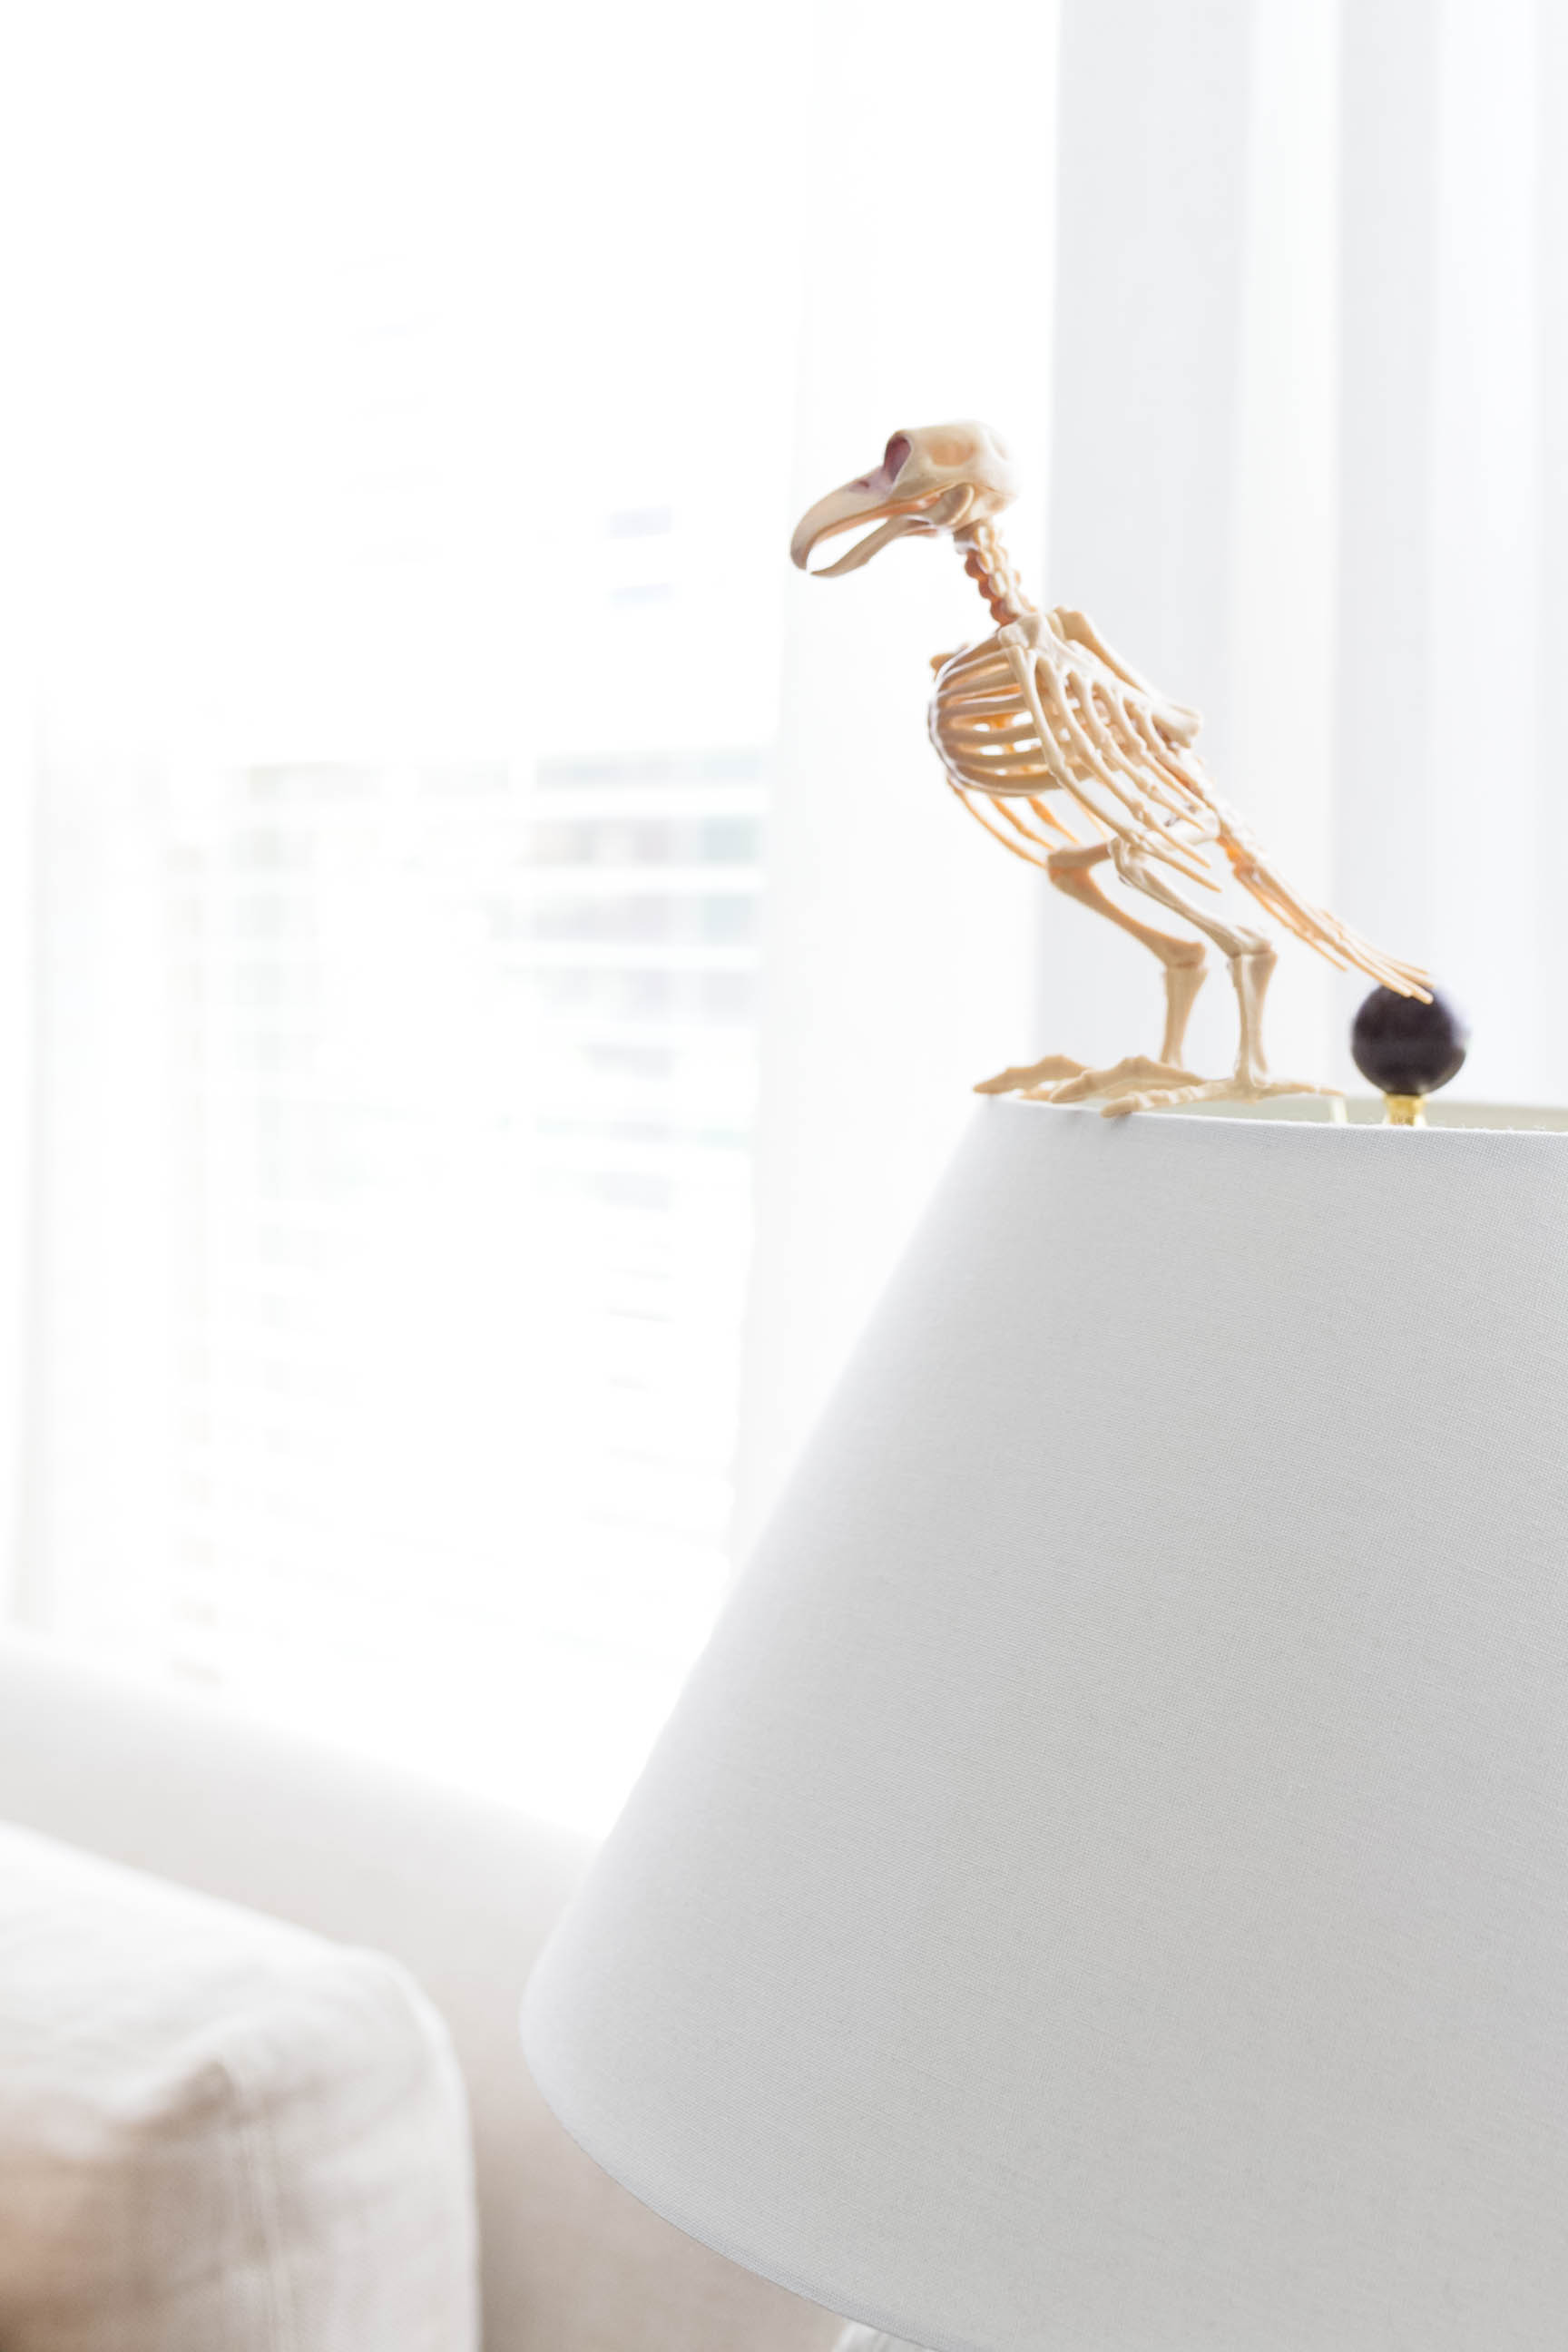 Simple Halloween Decorations for the Home-Bird Skeleton